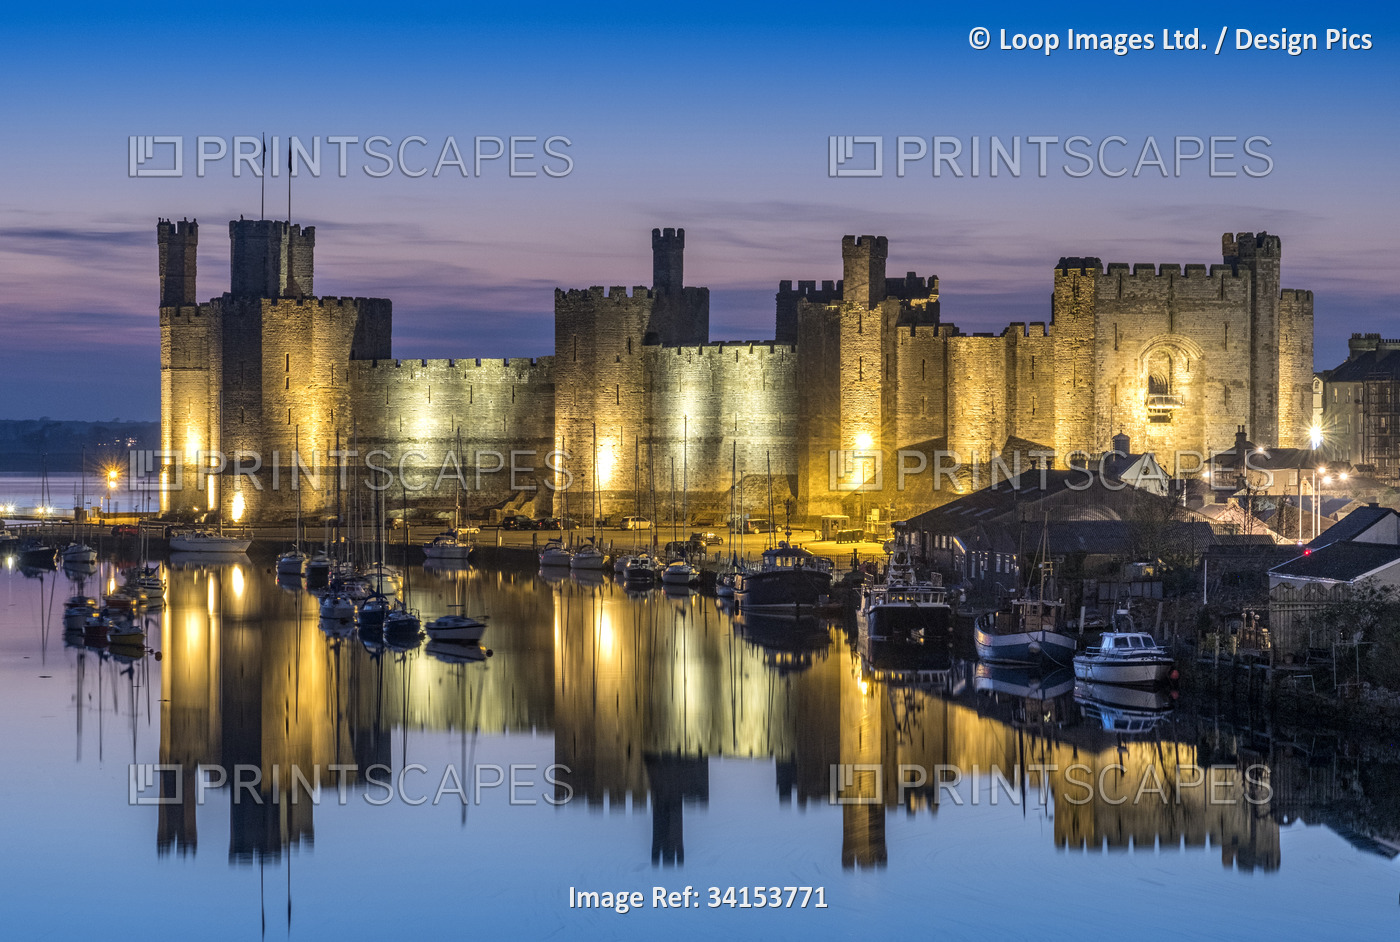 Caernarfon Castle and the River Seiont at night.